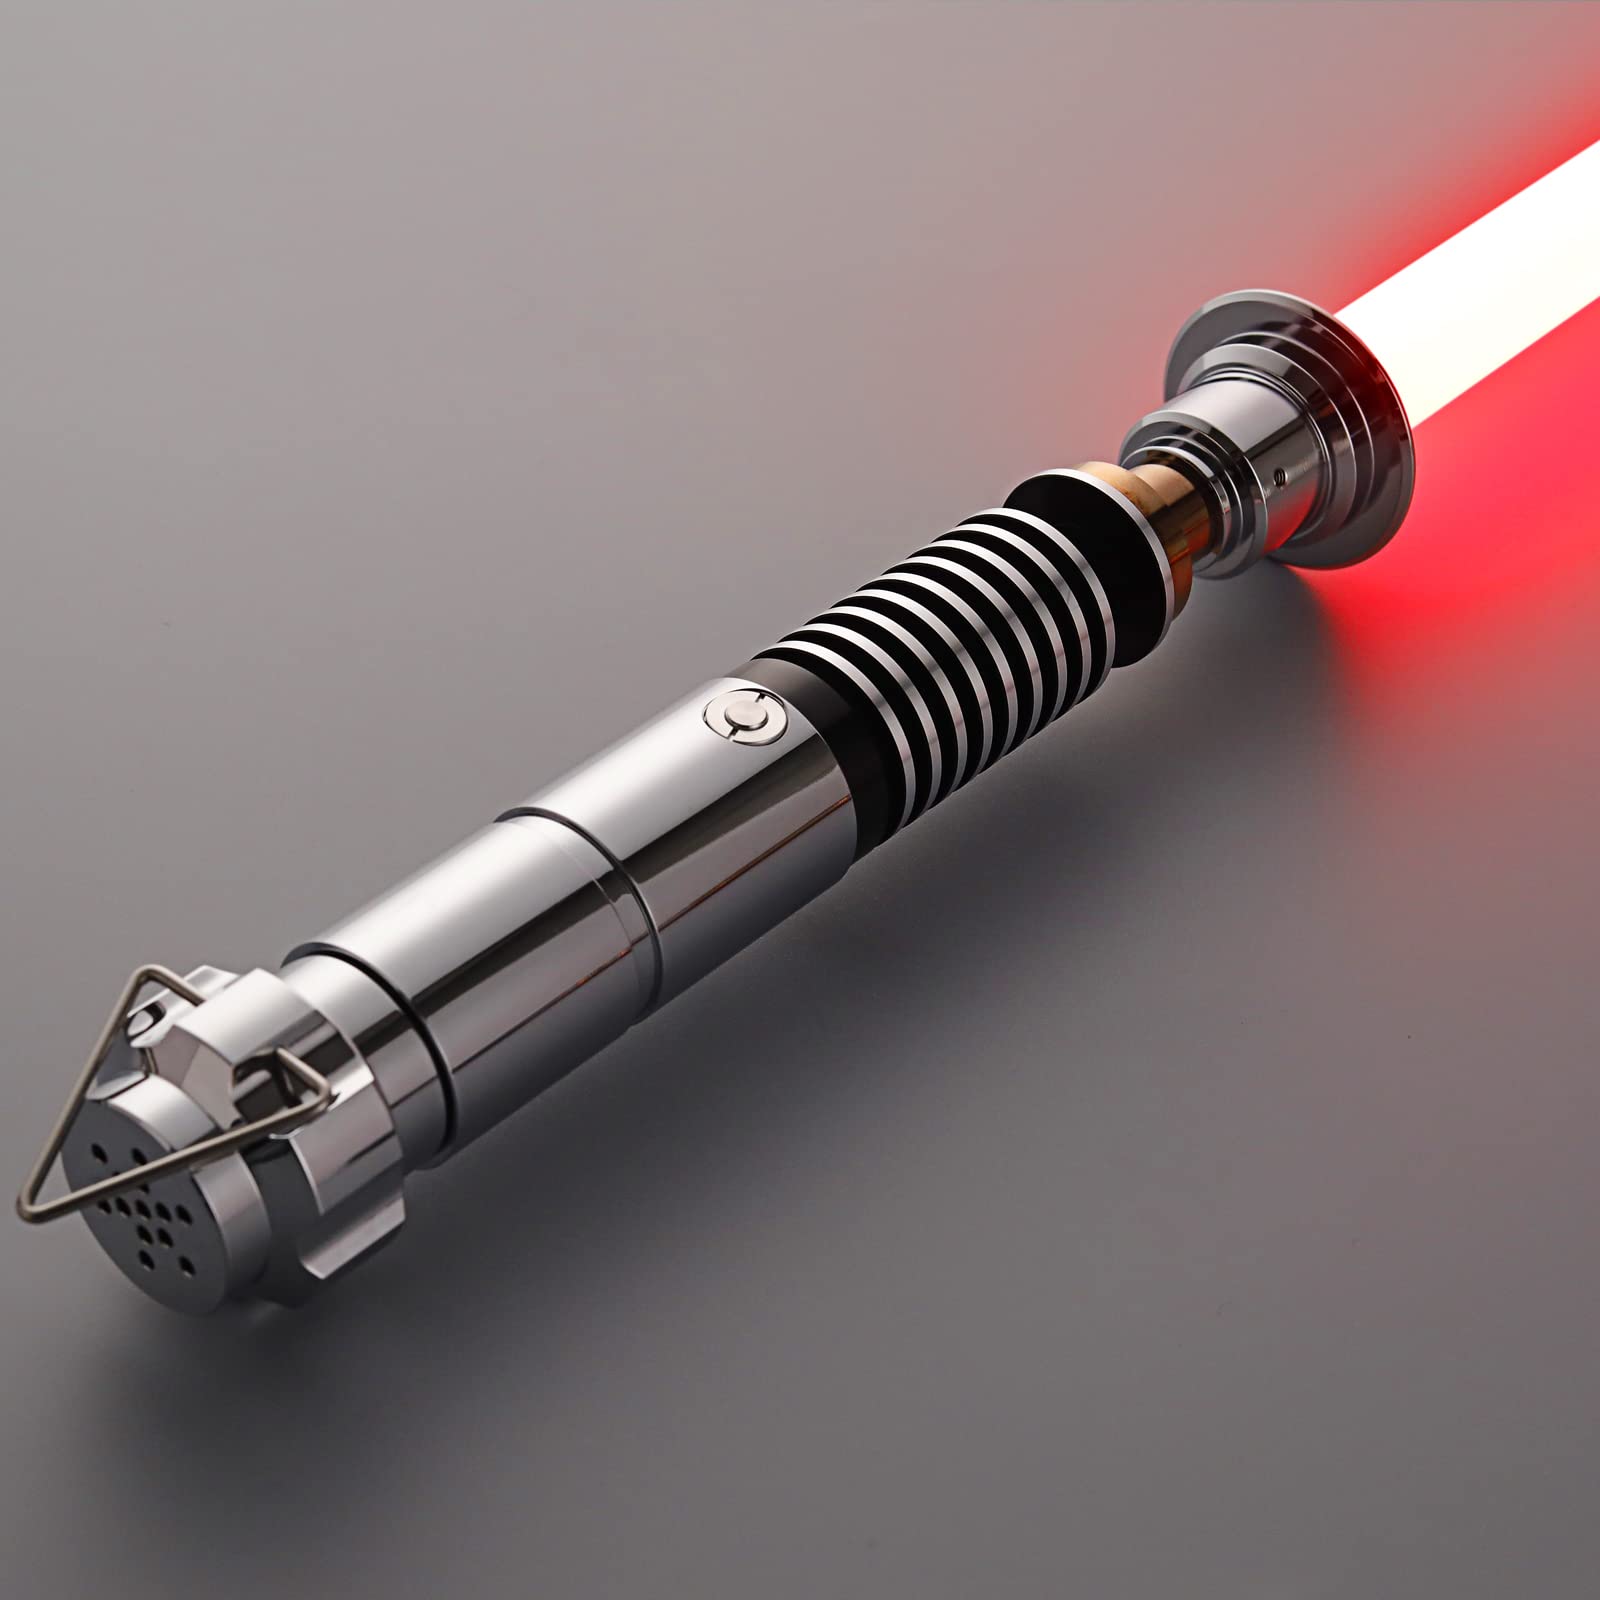 ZIASABERS RGB Lightsaber - Light Saber with Realistic Metal Hilt - Real Light Sabers - Dueling Saber with Smooth Swing Motion Control (from Our Character Inspired Lightsabers Collection)